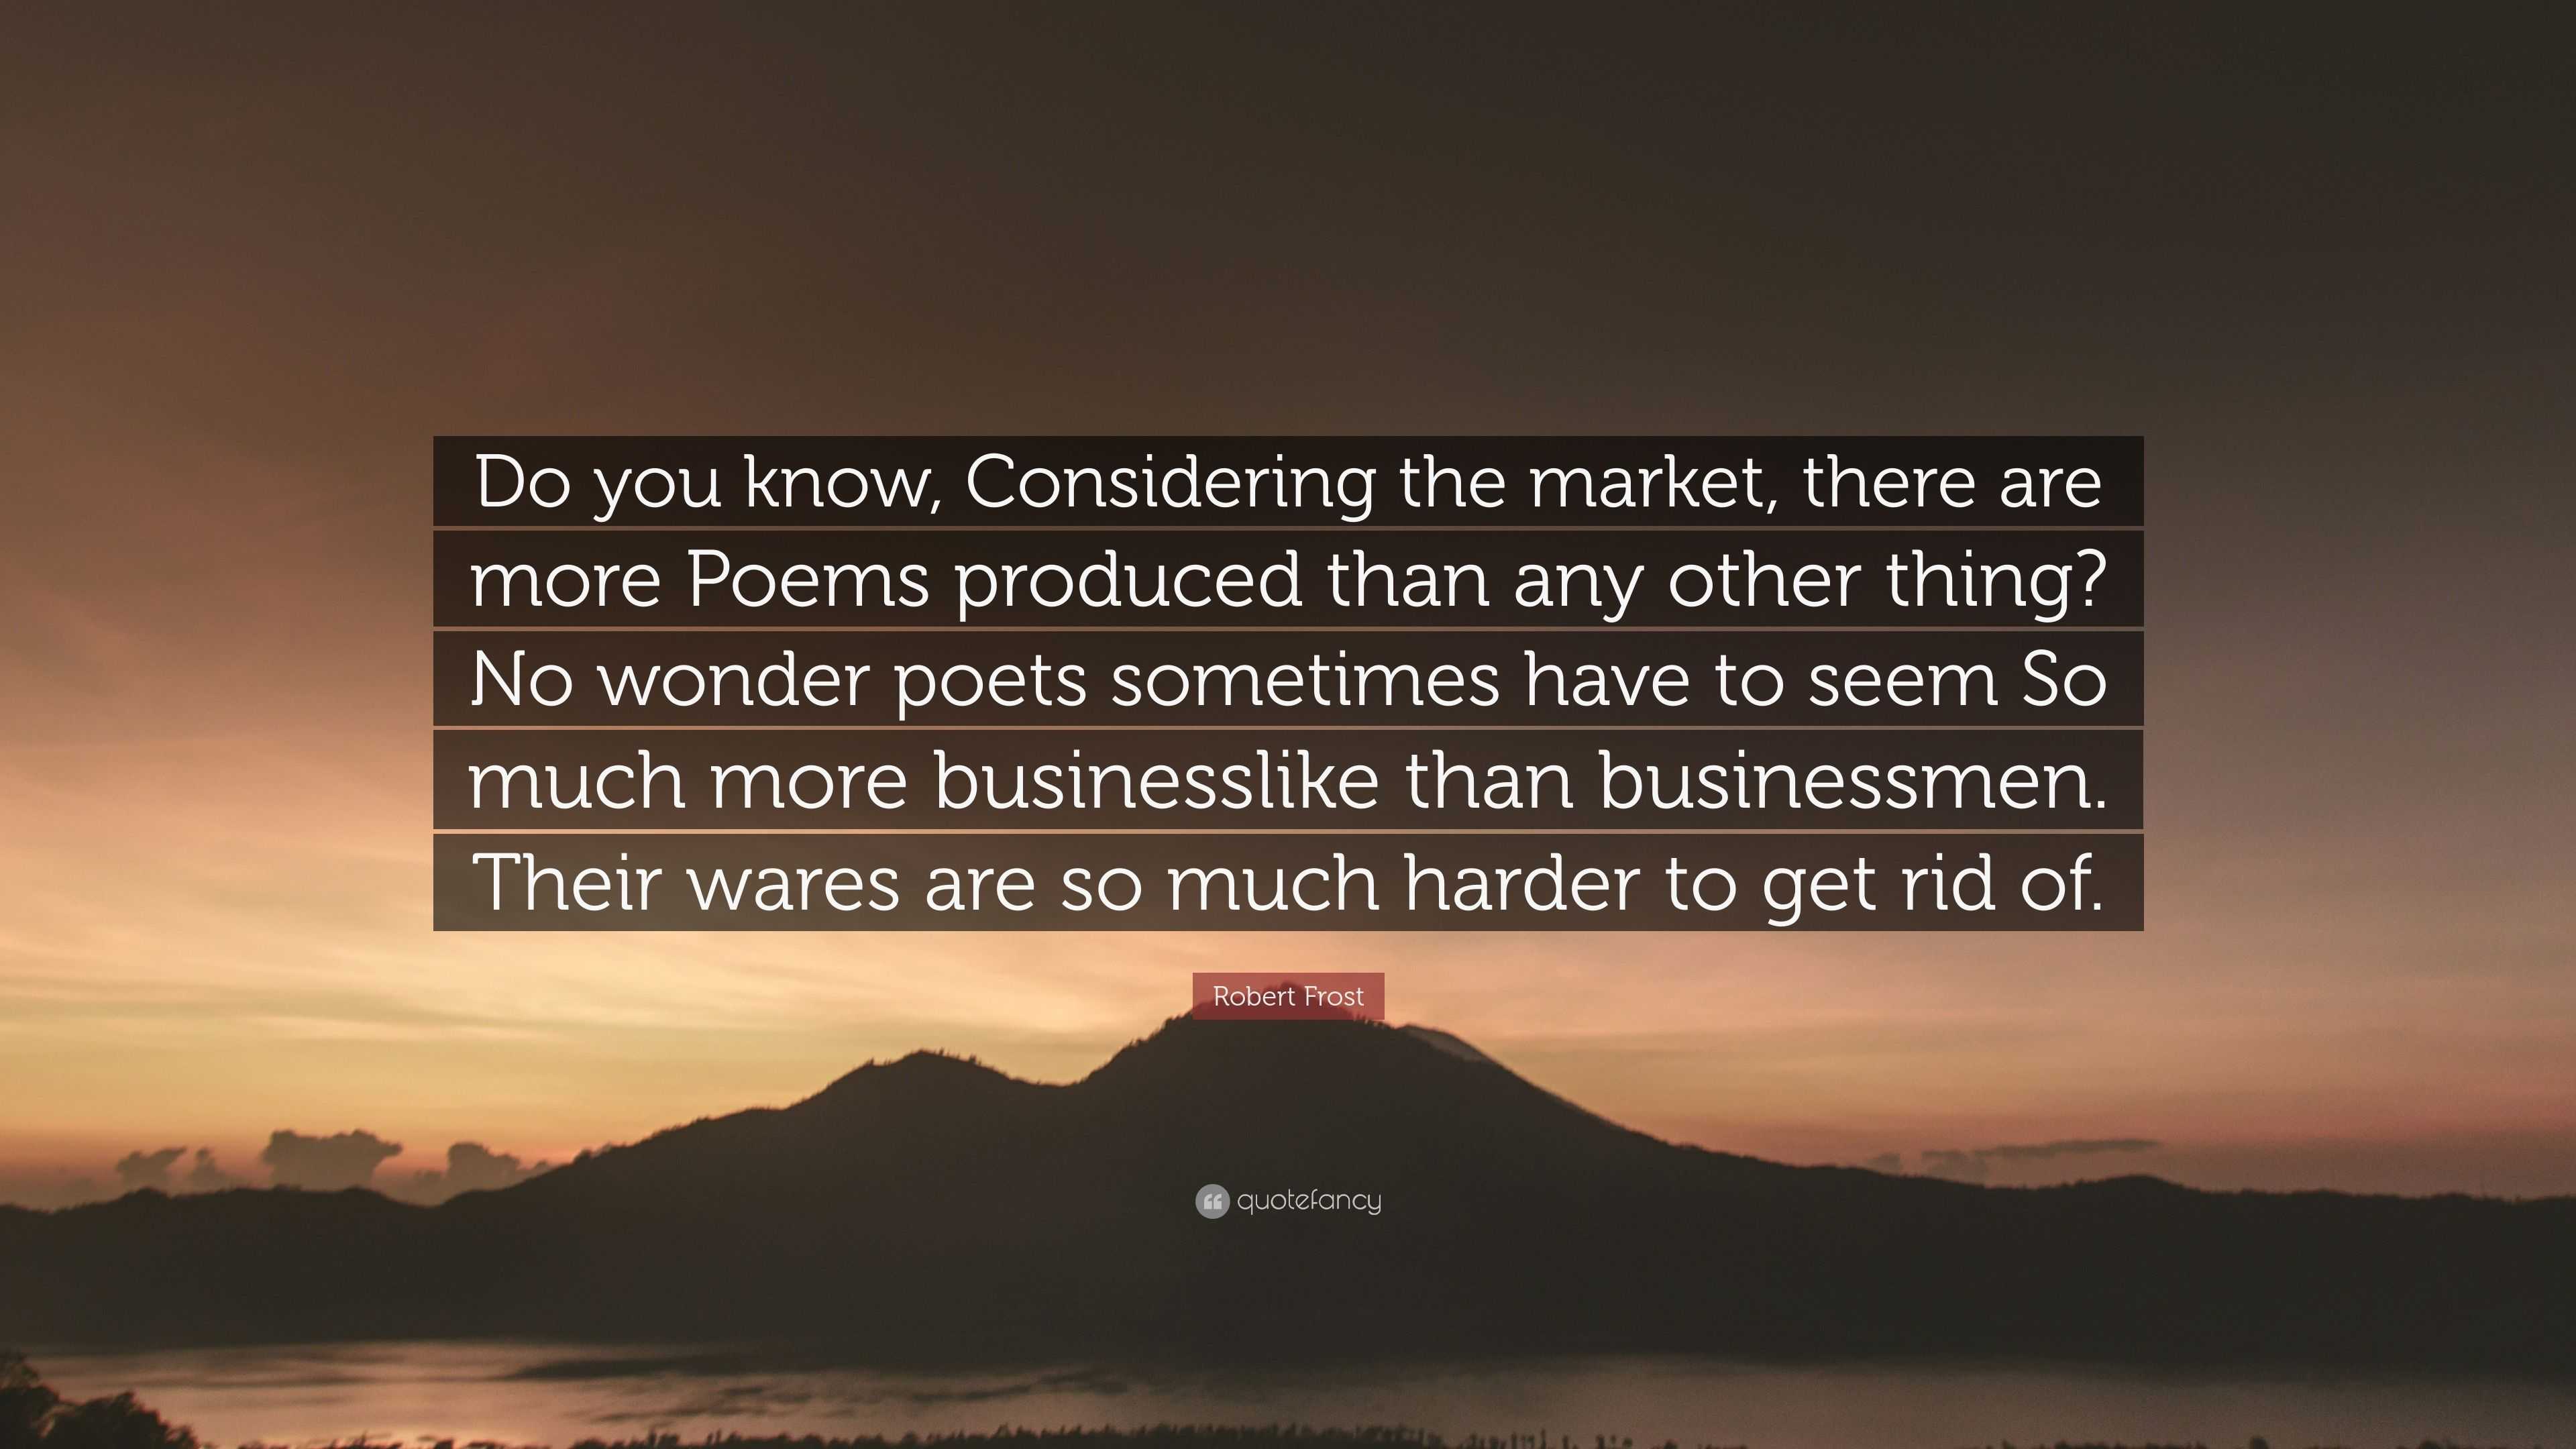 Robert Frost Quote: “Do you know, Considering the market, there are ...